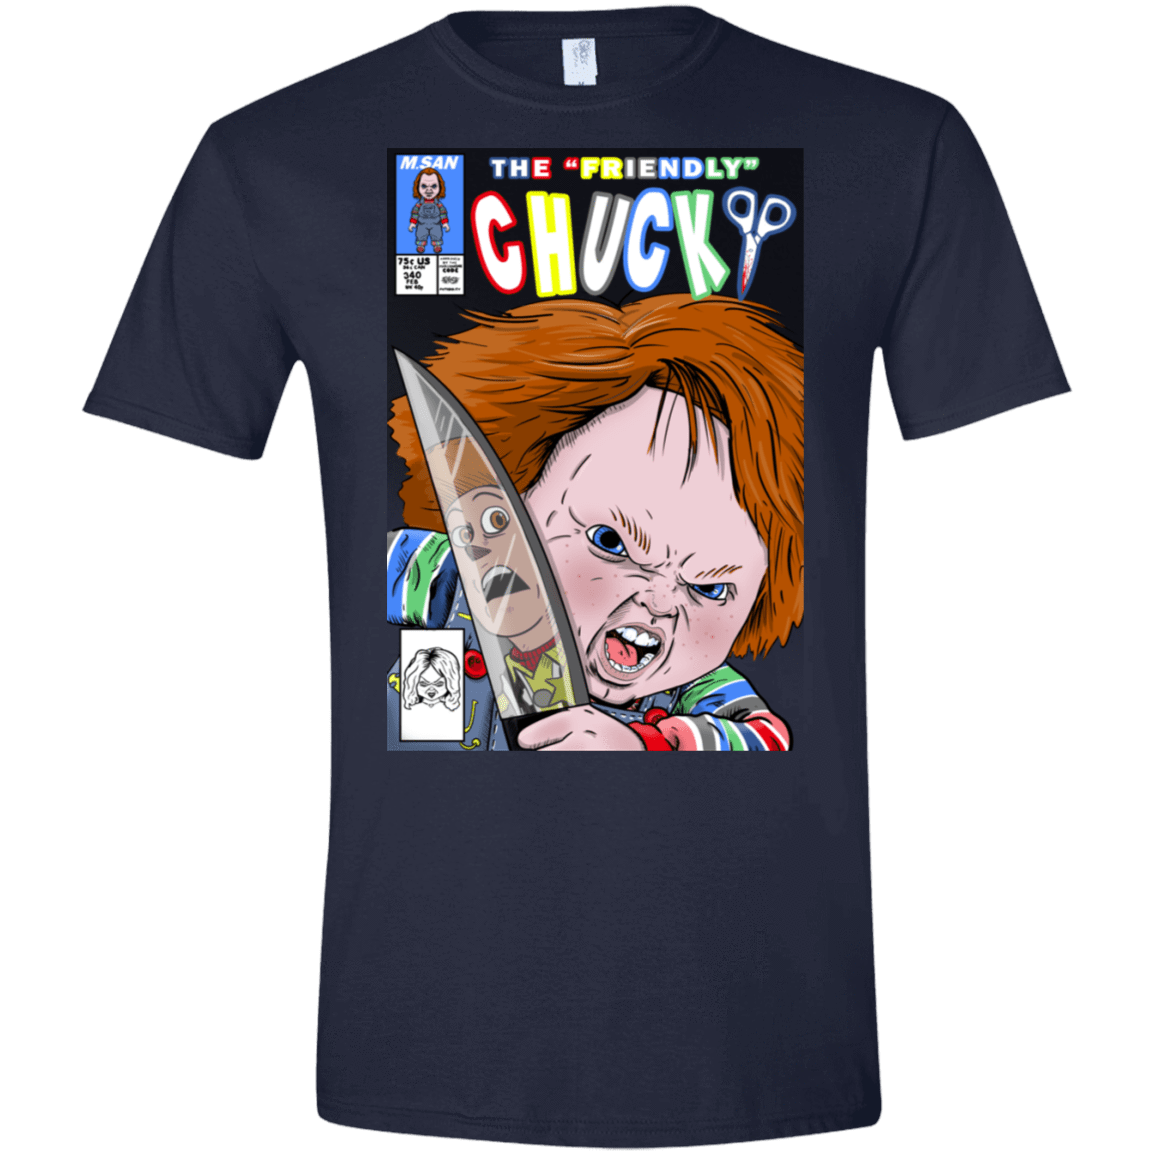 T-Shirts Navy / S The Friendly Chucky Men's Semi-Fitted Softstyle